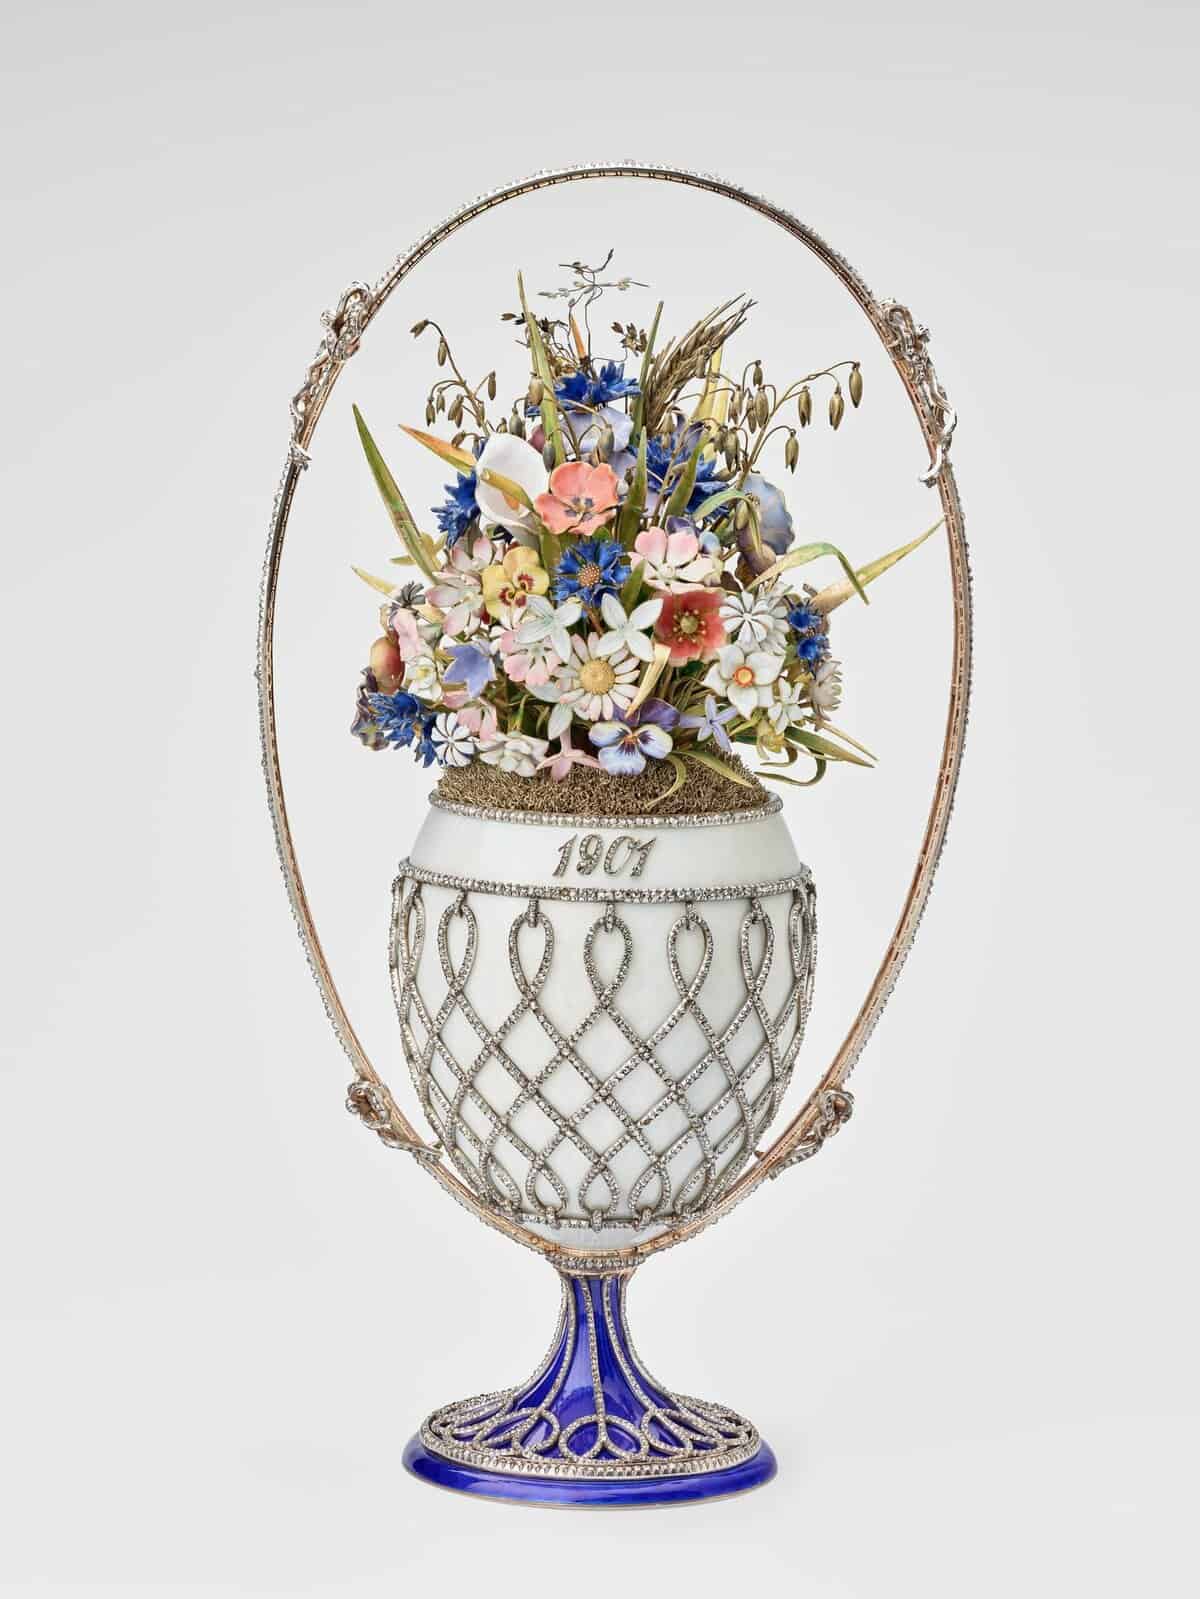 The Basket of Flowers Faberge Egg